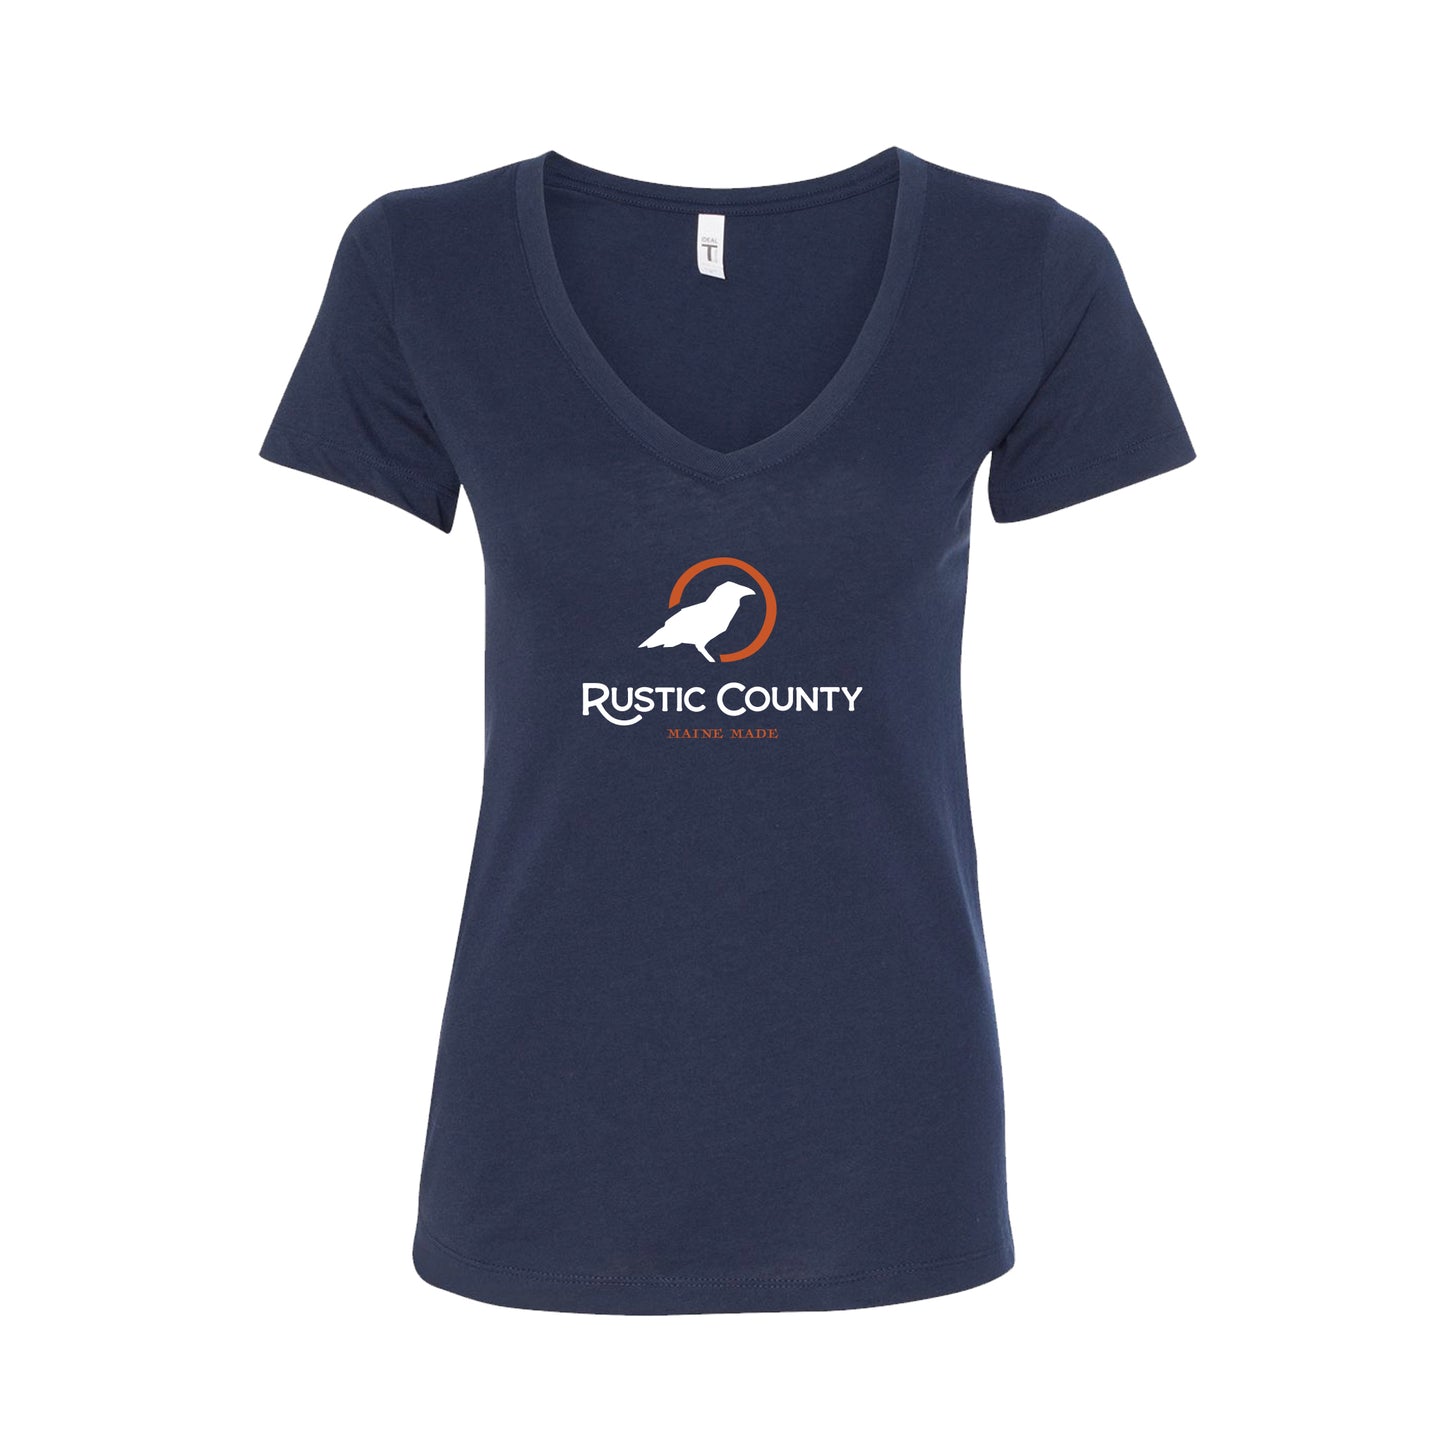 Picture of Rustic County women's t-shirt with logo